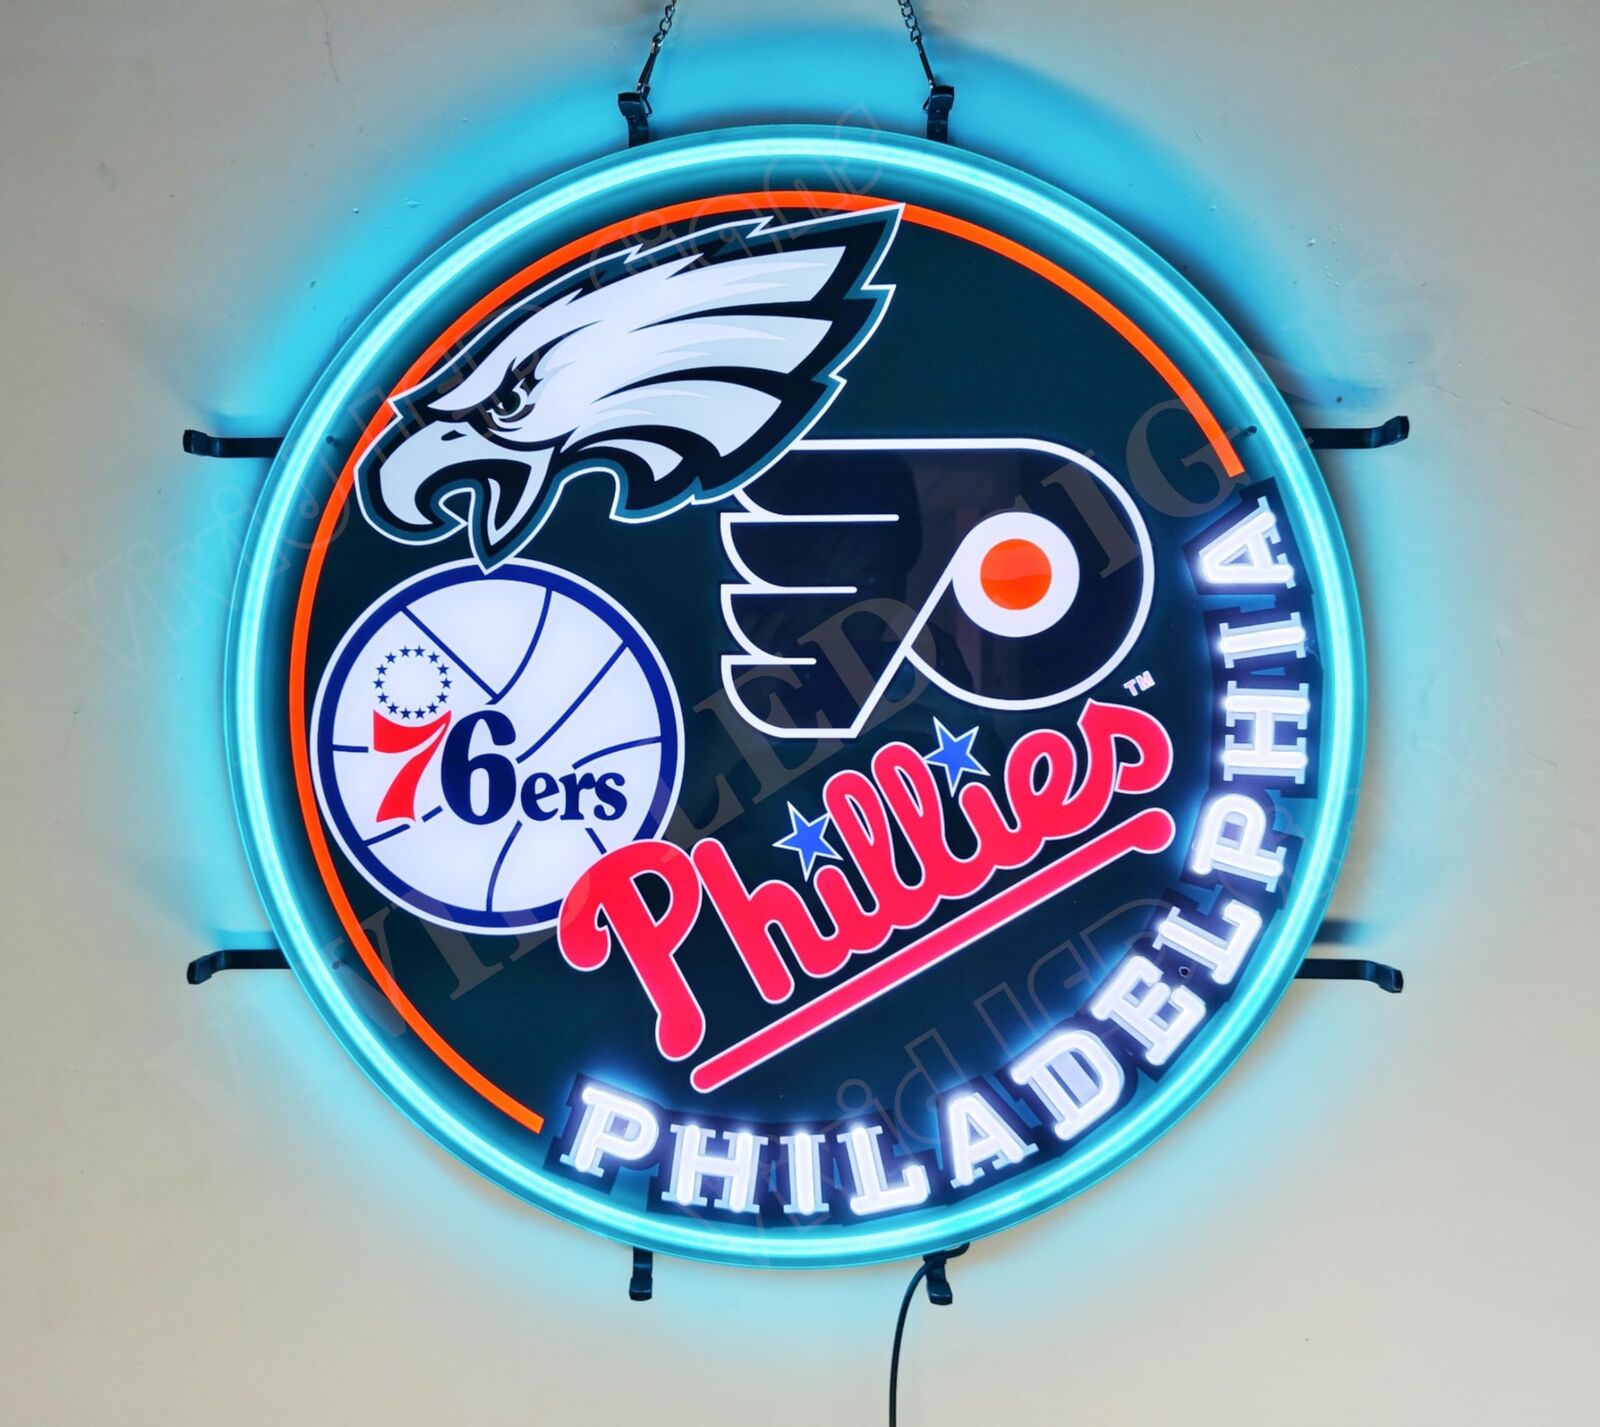 Philadelphia Eagles 76ers Phillies Flyers Vivid LED Neon Sign Lamp With Dimmer